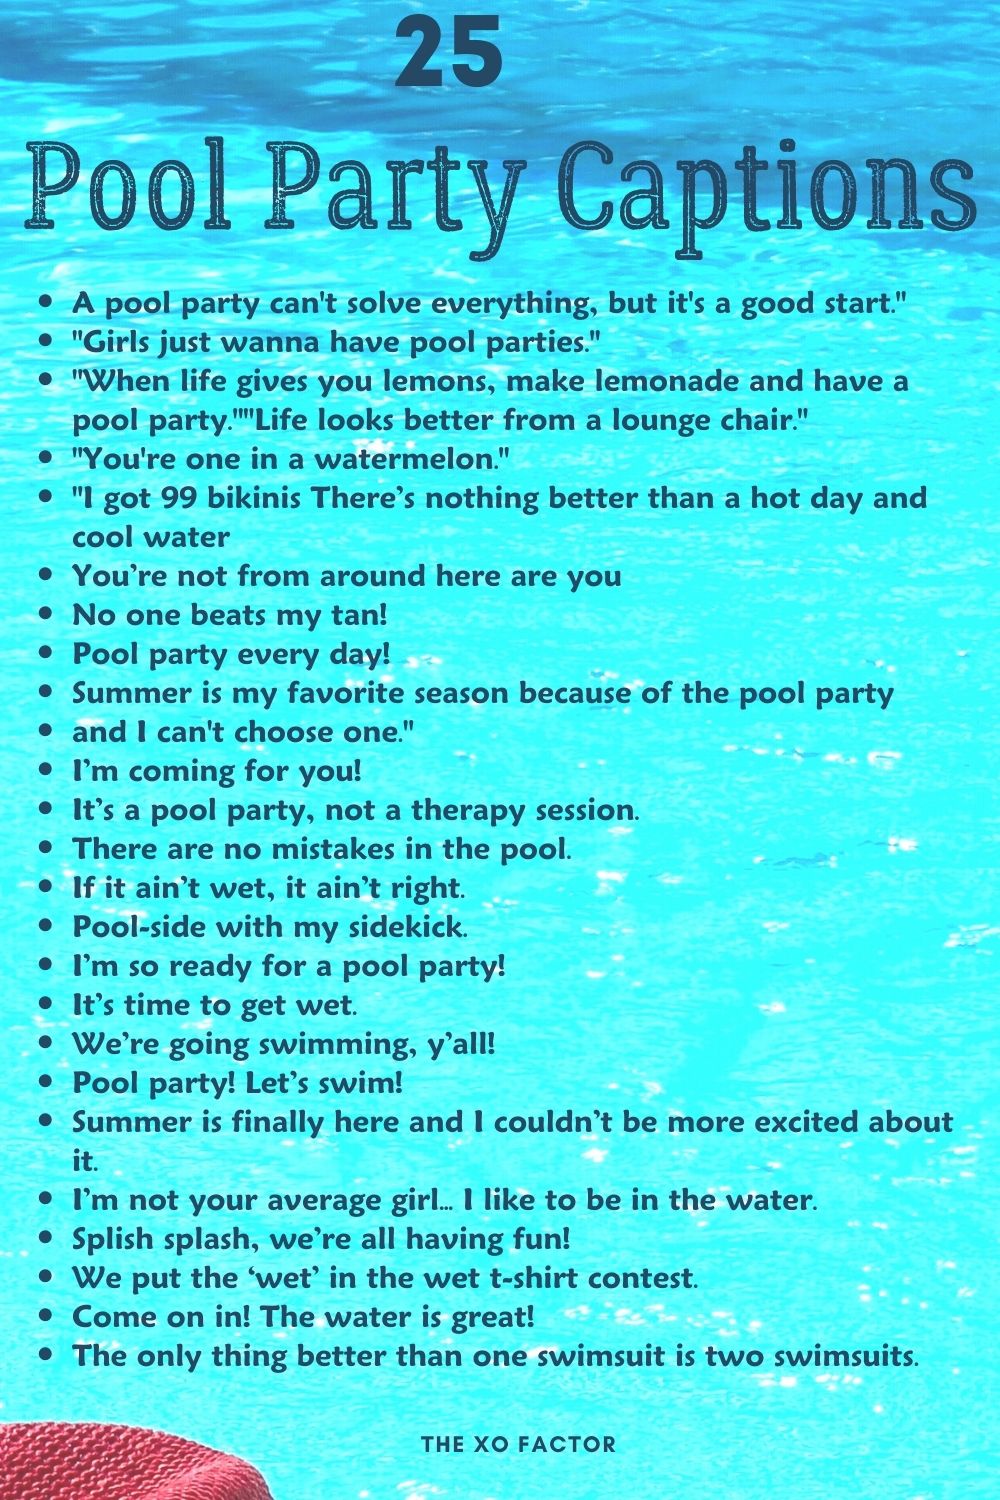 Pool party captions